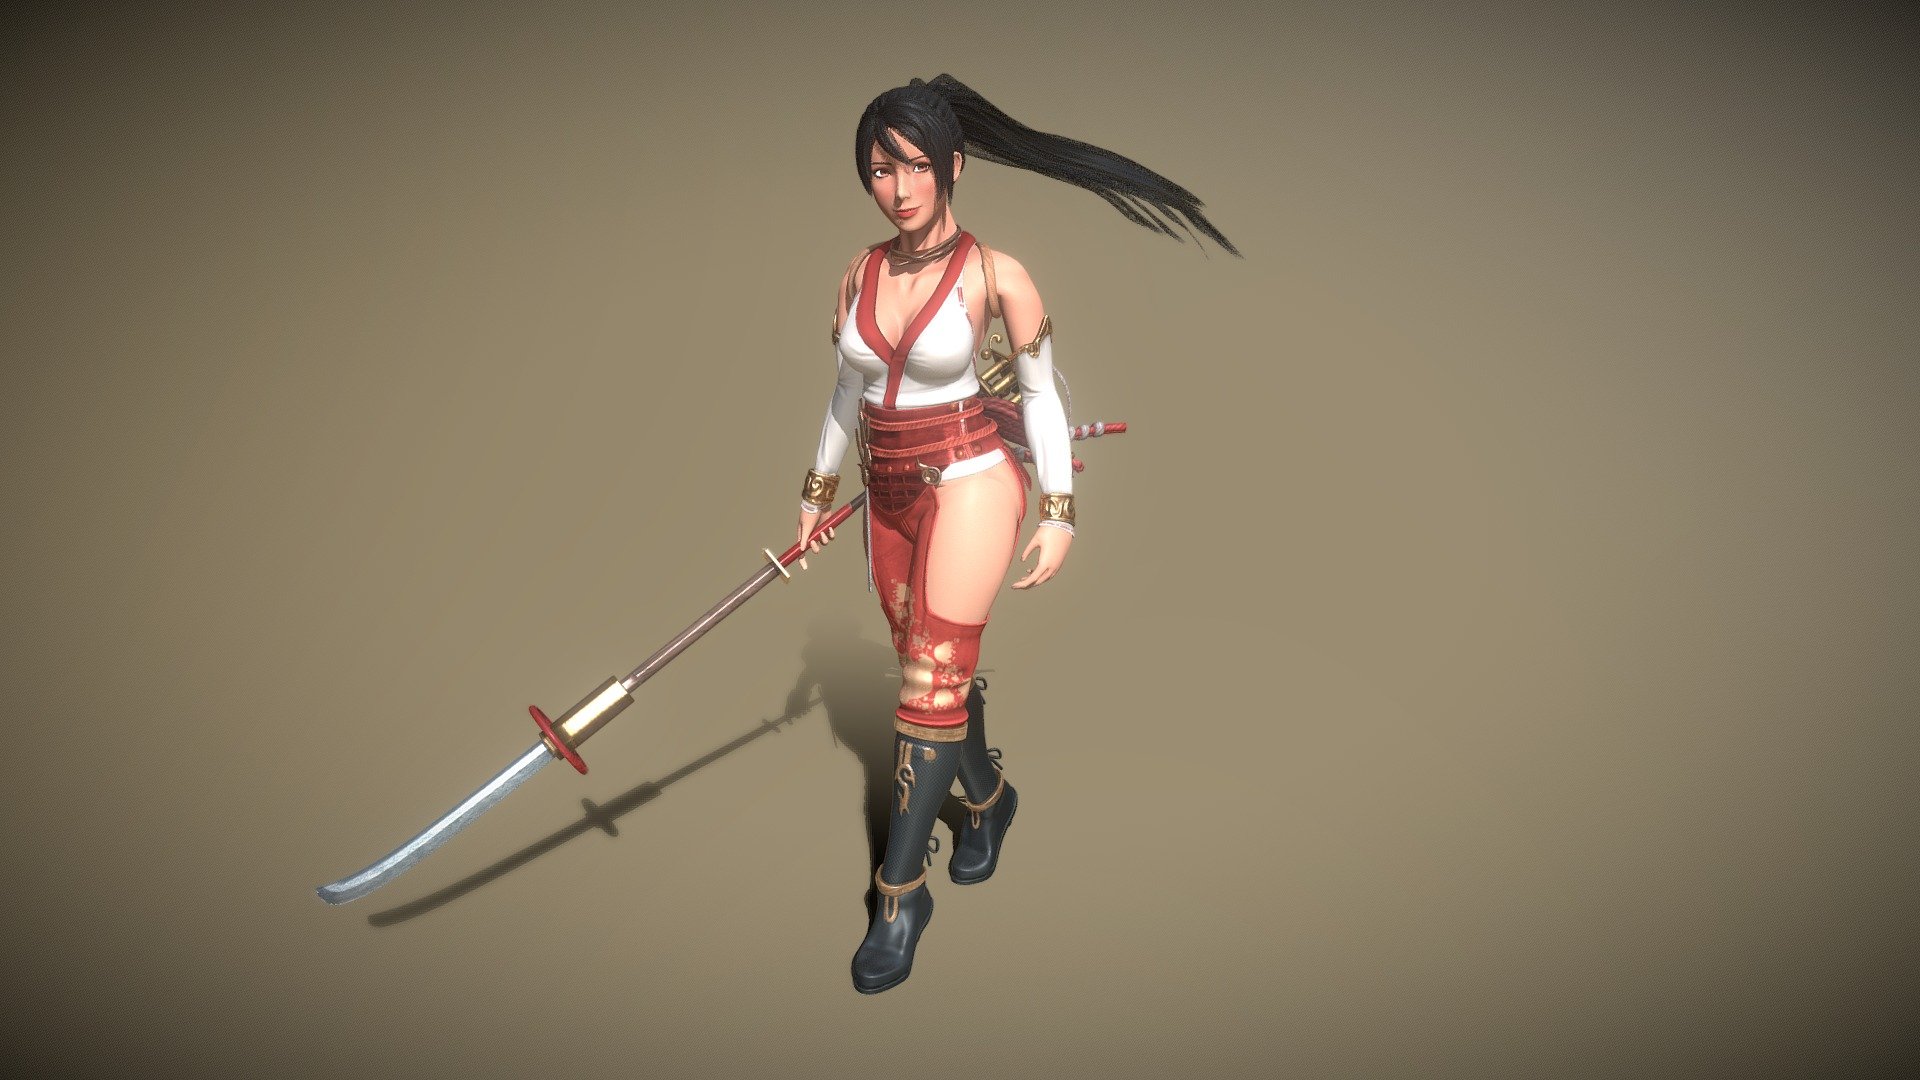 Here I present my fanart of Momiji from Ninja Gaiden Game. I made it in blender for self-training.
I've did some simulations to the character. If you want to look the blend file that include the simulation, feel free to message me or write a comment for the link.

Thank you for visiting!!! - Momiji-Fanart Character - 3D model by _Alcane 3d model